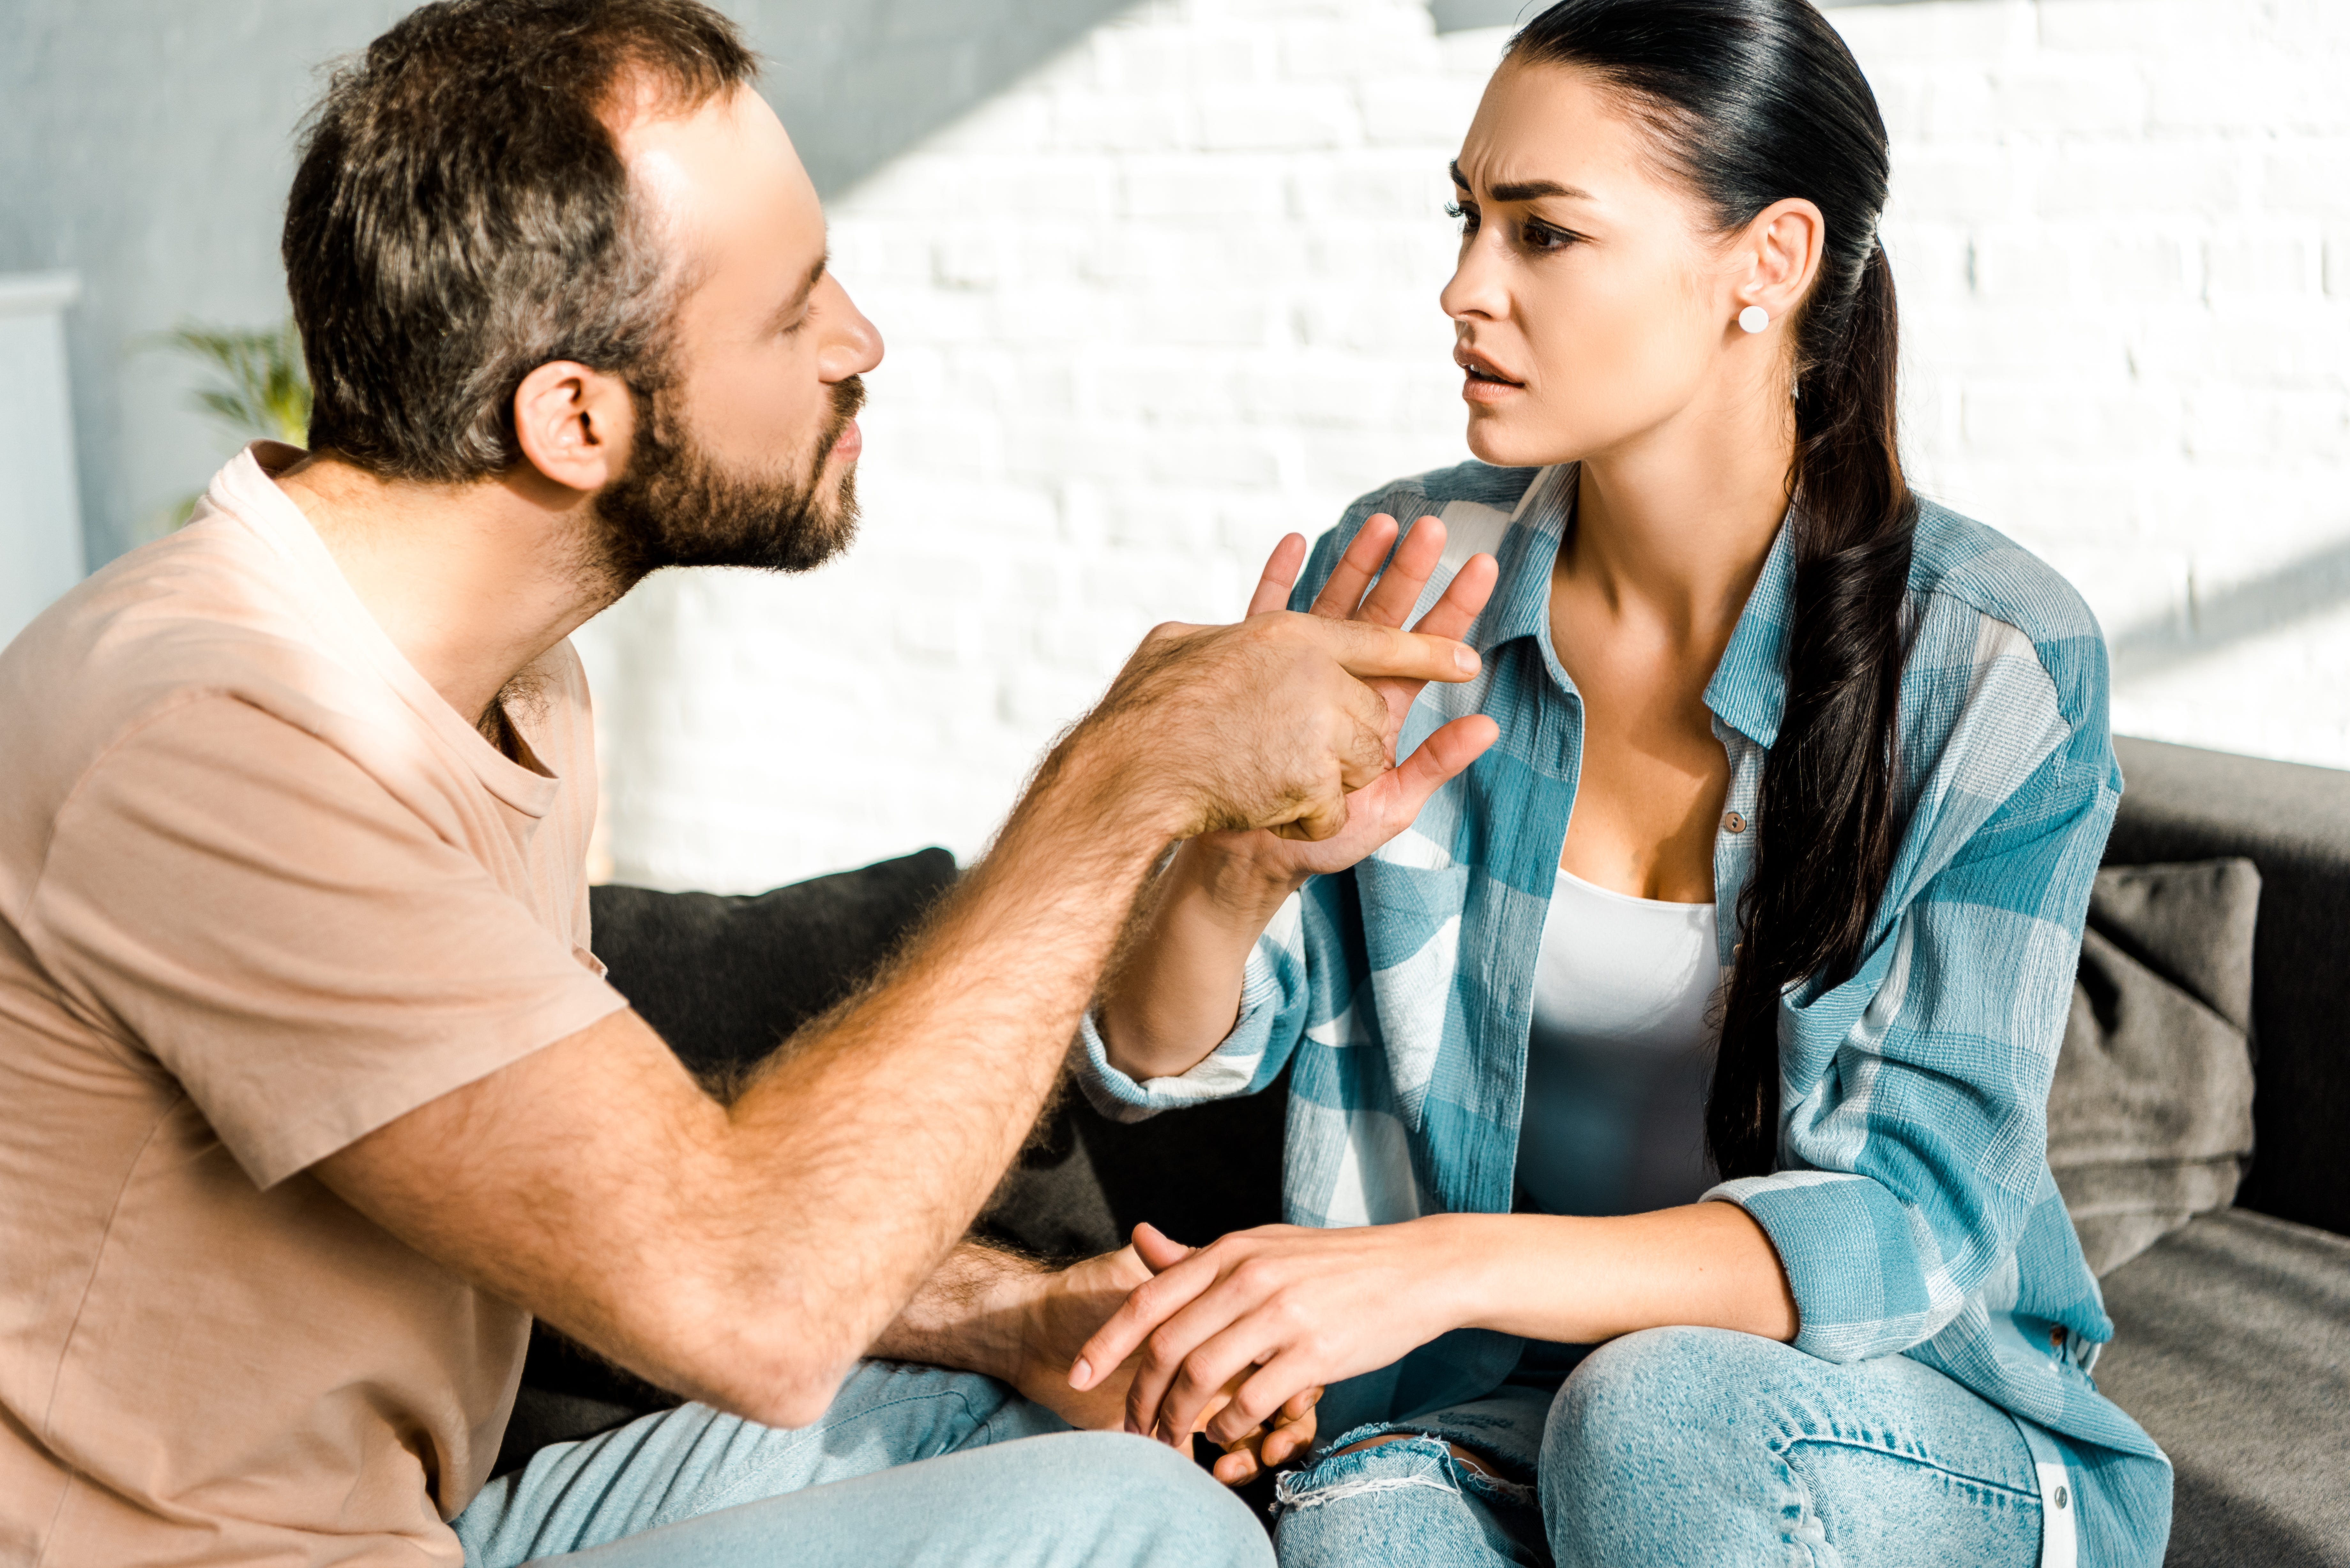 Defensive behaviors are ruining your relationships | Practical Growth